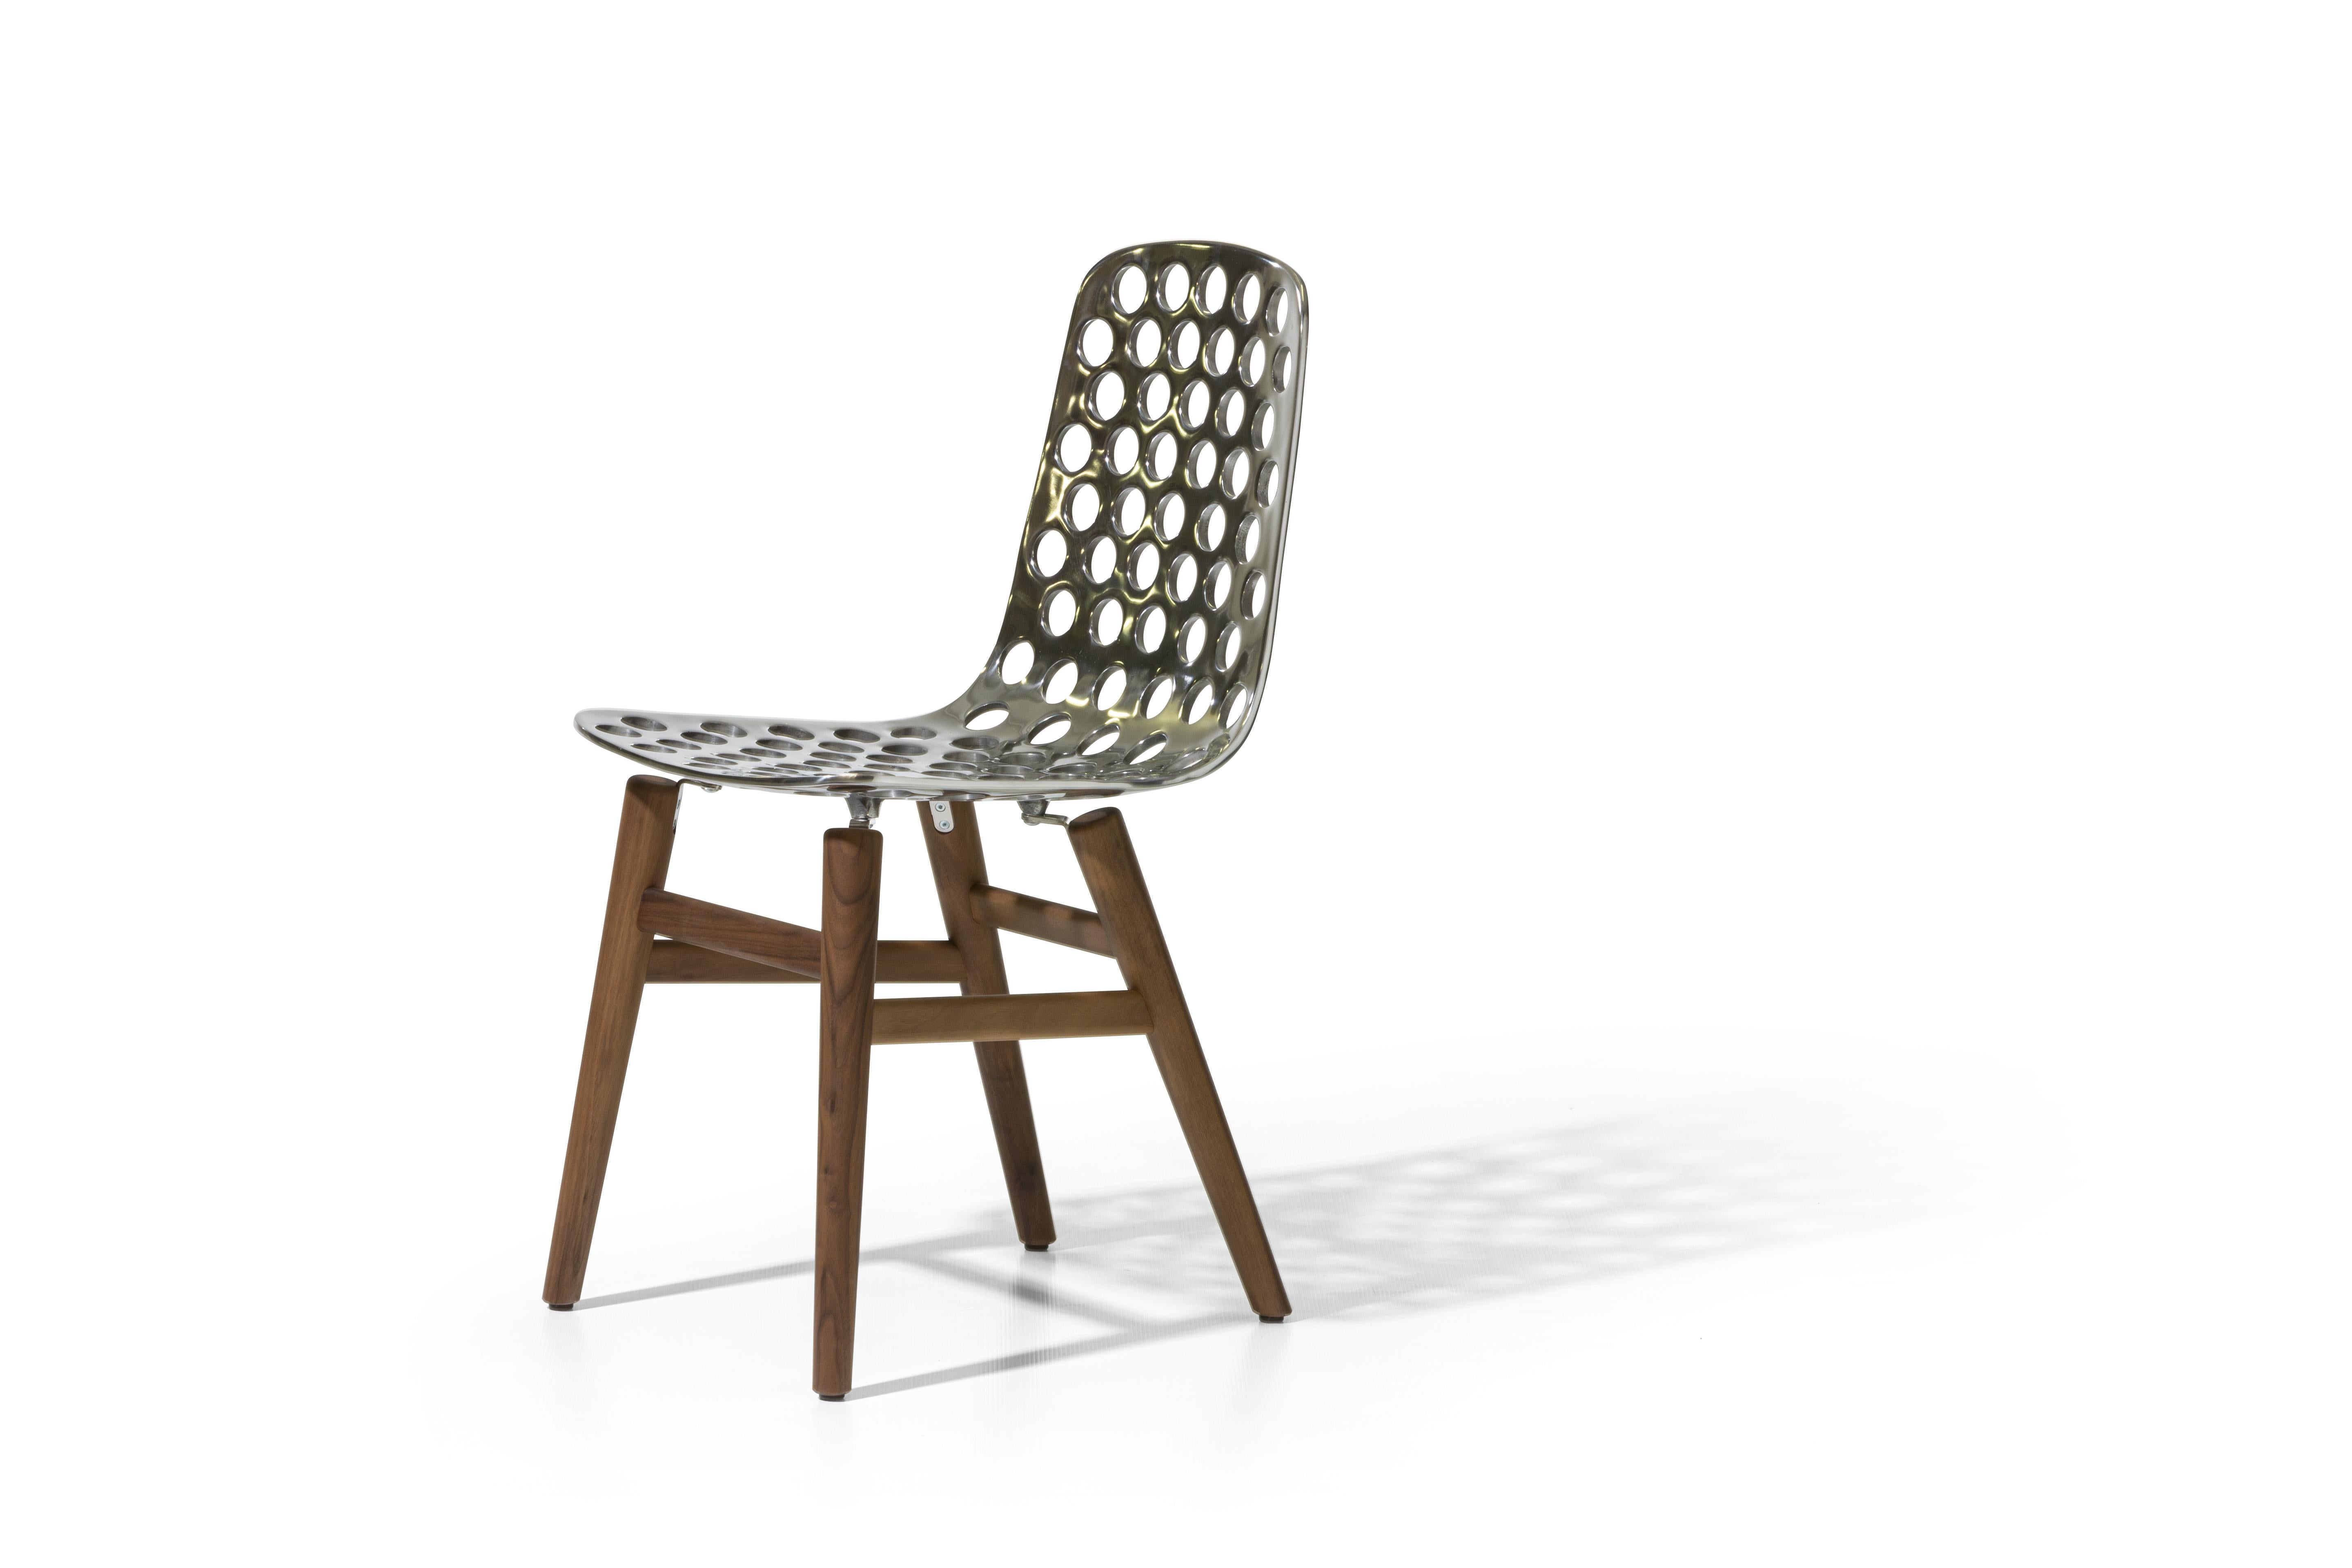 Gervasoni Next 121 shell cast polished aluminum chair in walnut by Paola Navone

Shell chair in cast polished aluminum decorated with macropores, wooden legs in walnut / oak. Available wood finishes: natural lacquered American walnut; bleached